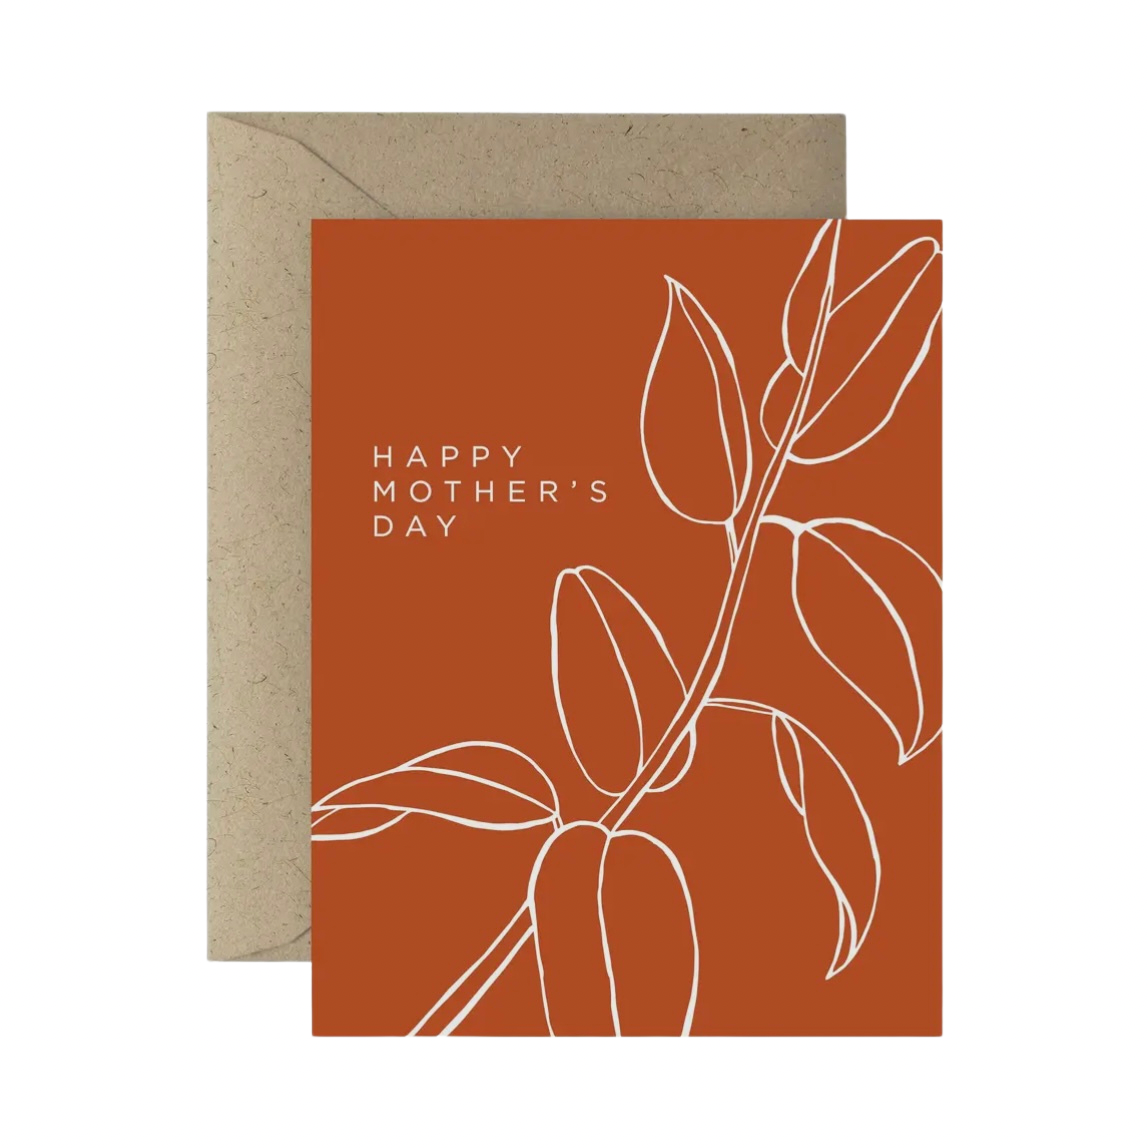 Happy Mother’s Day Warm Greeting Card